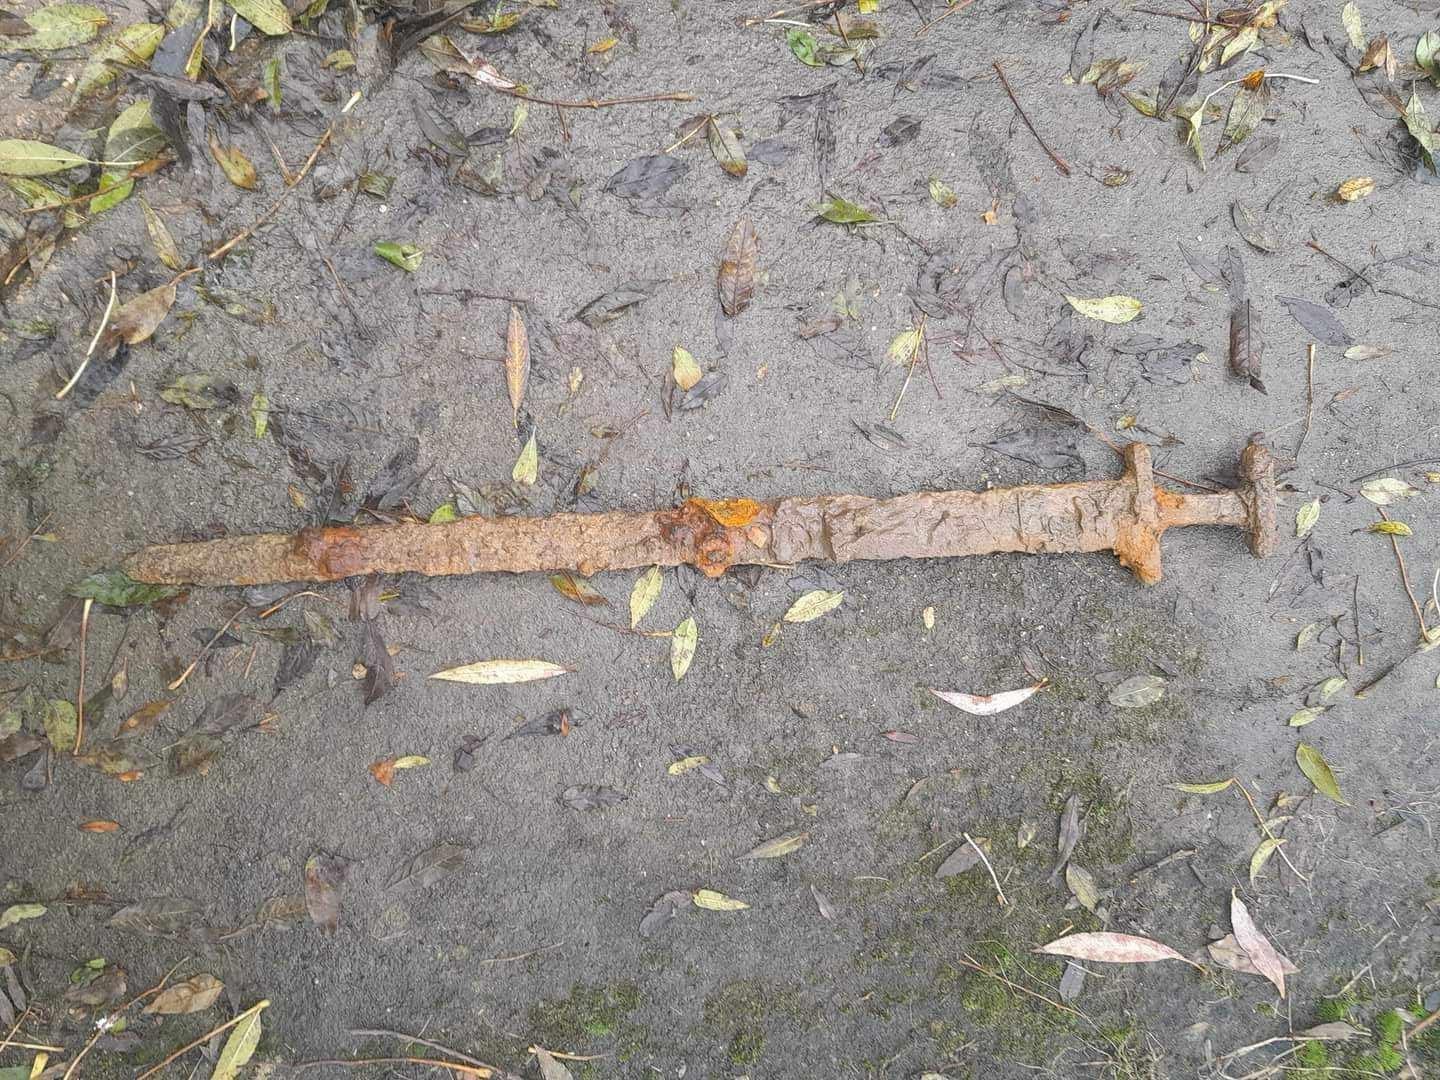 Man Finds Intact Viking Sword at the Bottom of a River. Credit: Trevor Penny.